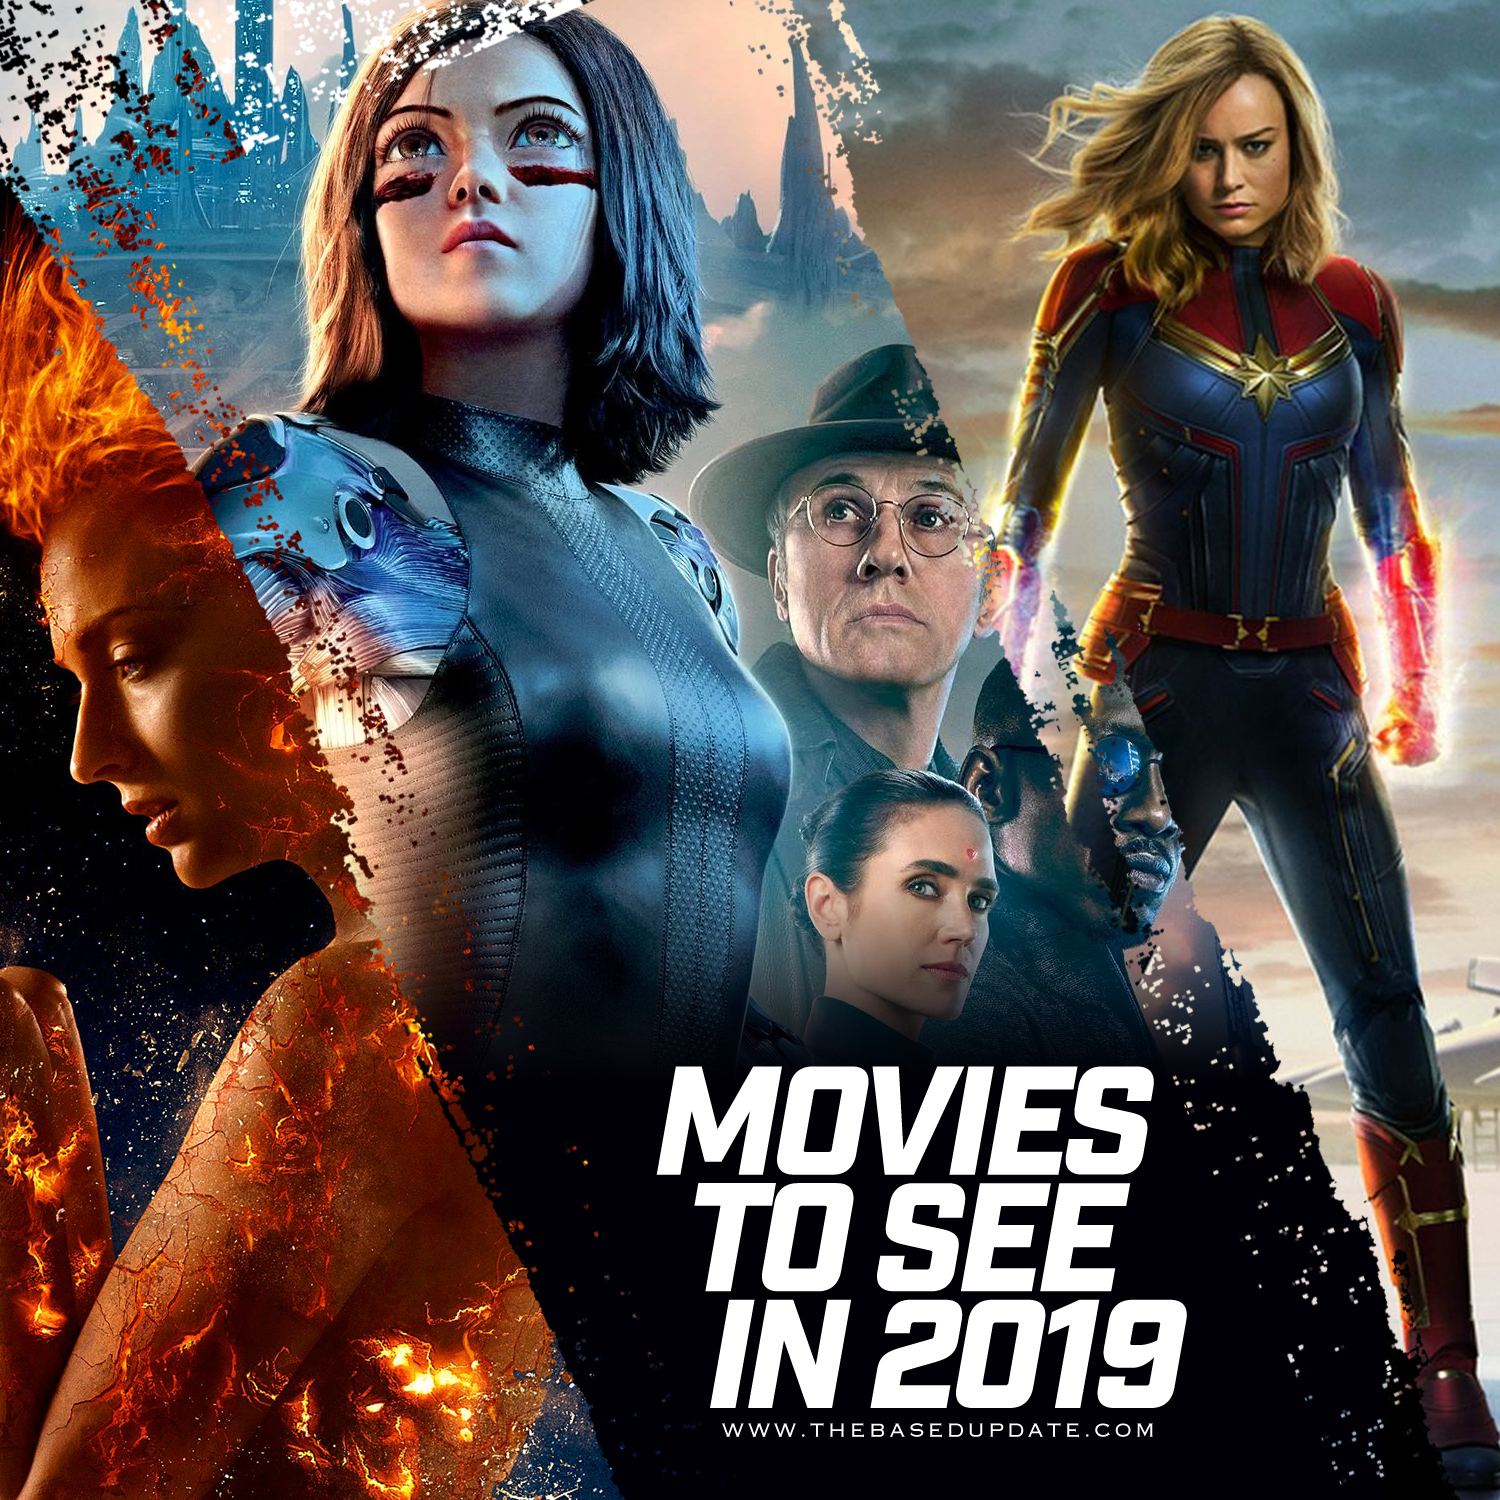 Movies to See in 2019